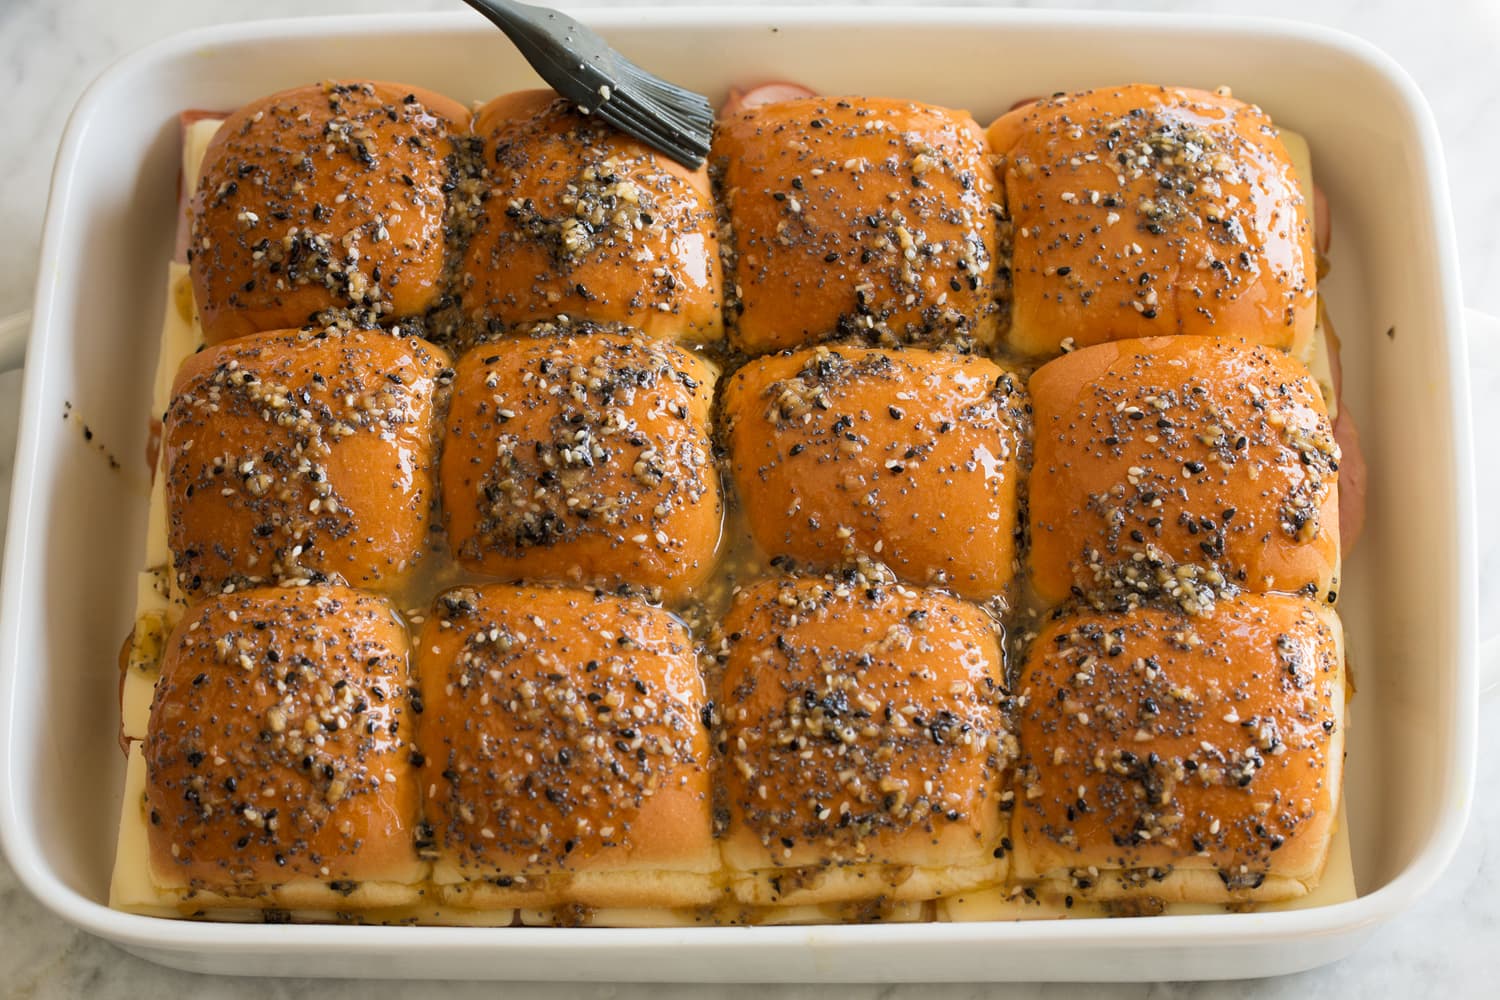 Spreading butter poppy seed mixture over rolls in casserole dish.